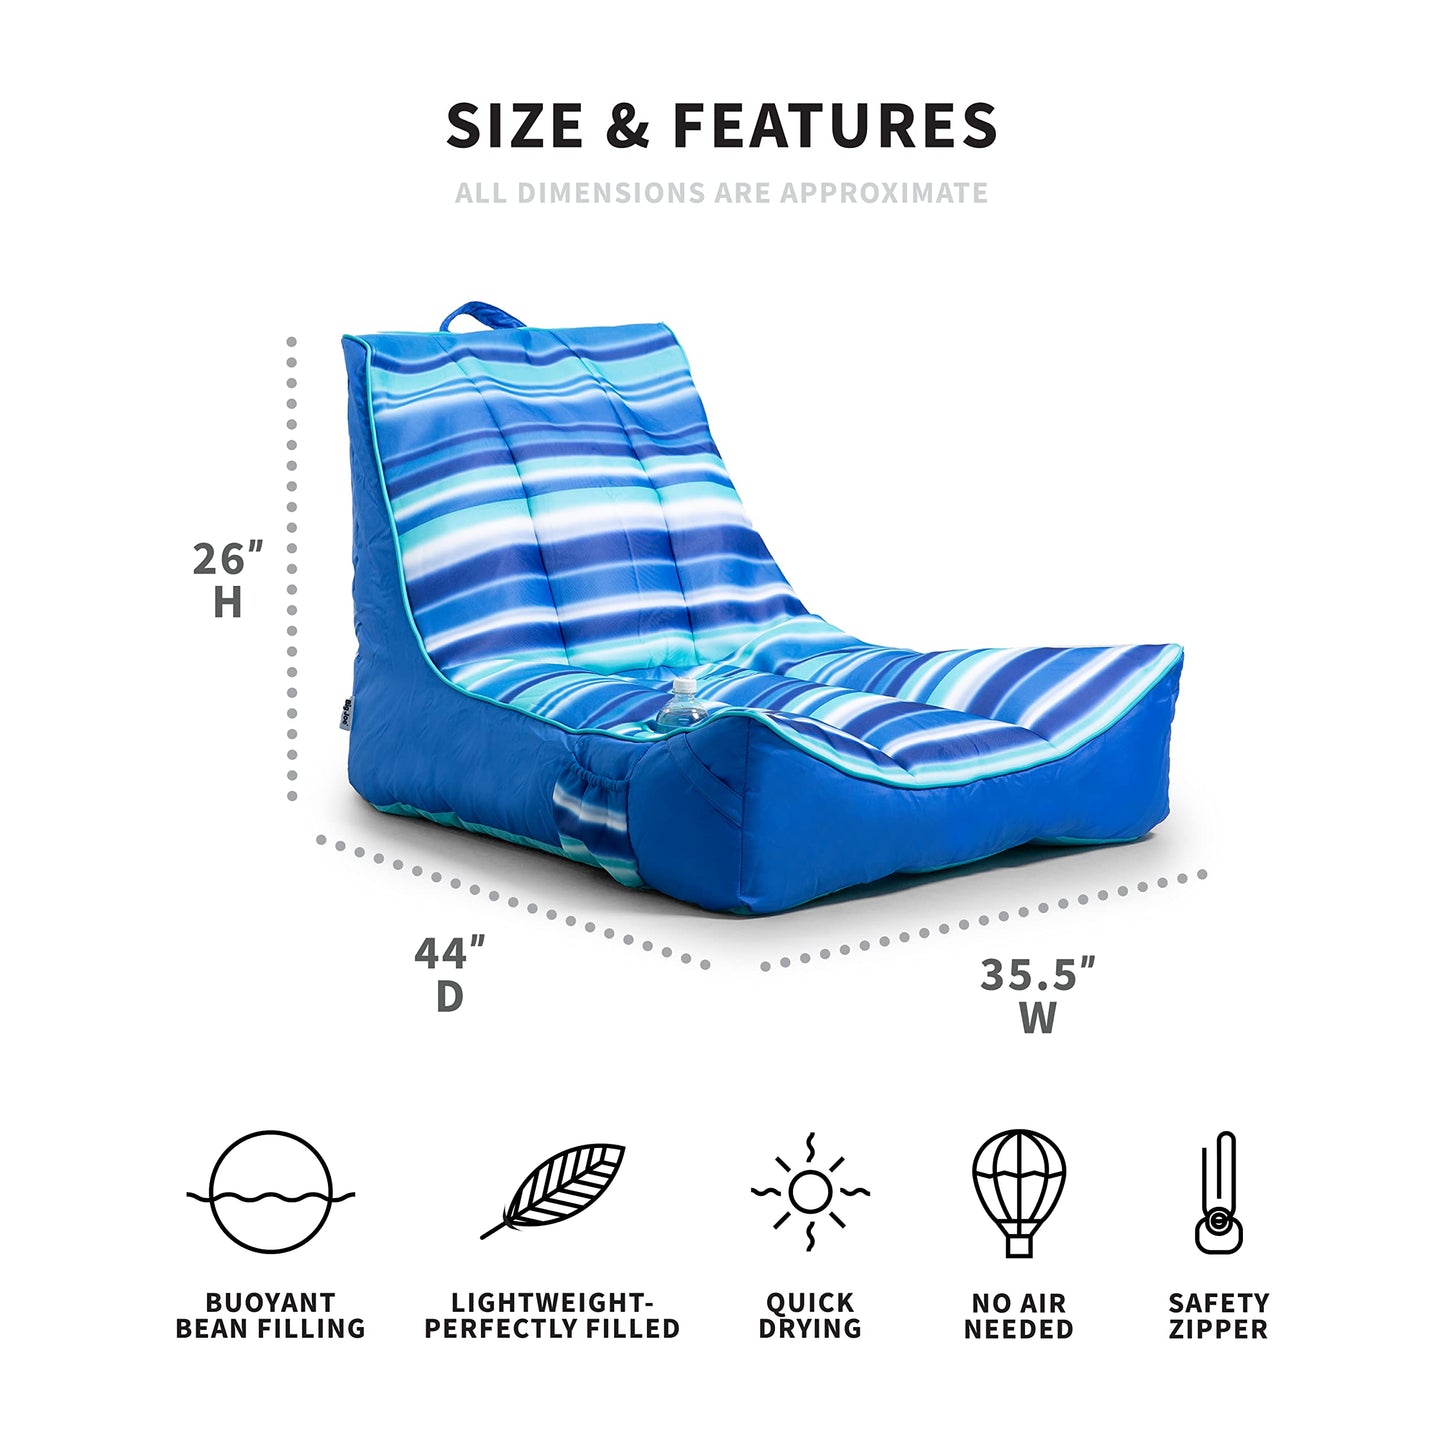 Big Joe Captain's Float No Inflation Needed Pool Lounger with Drink Holder, Blurred Blue Double Sided Mesh, 3ft Blurred Stripe Captains Float 2.0